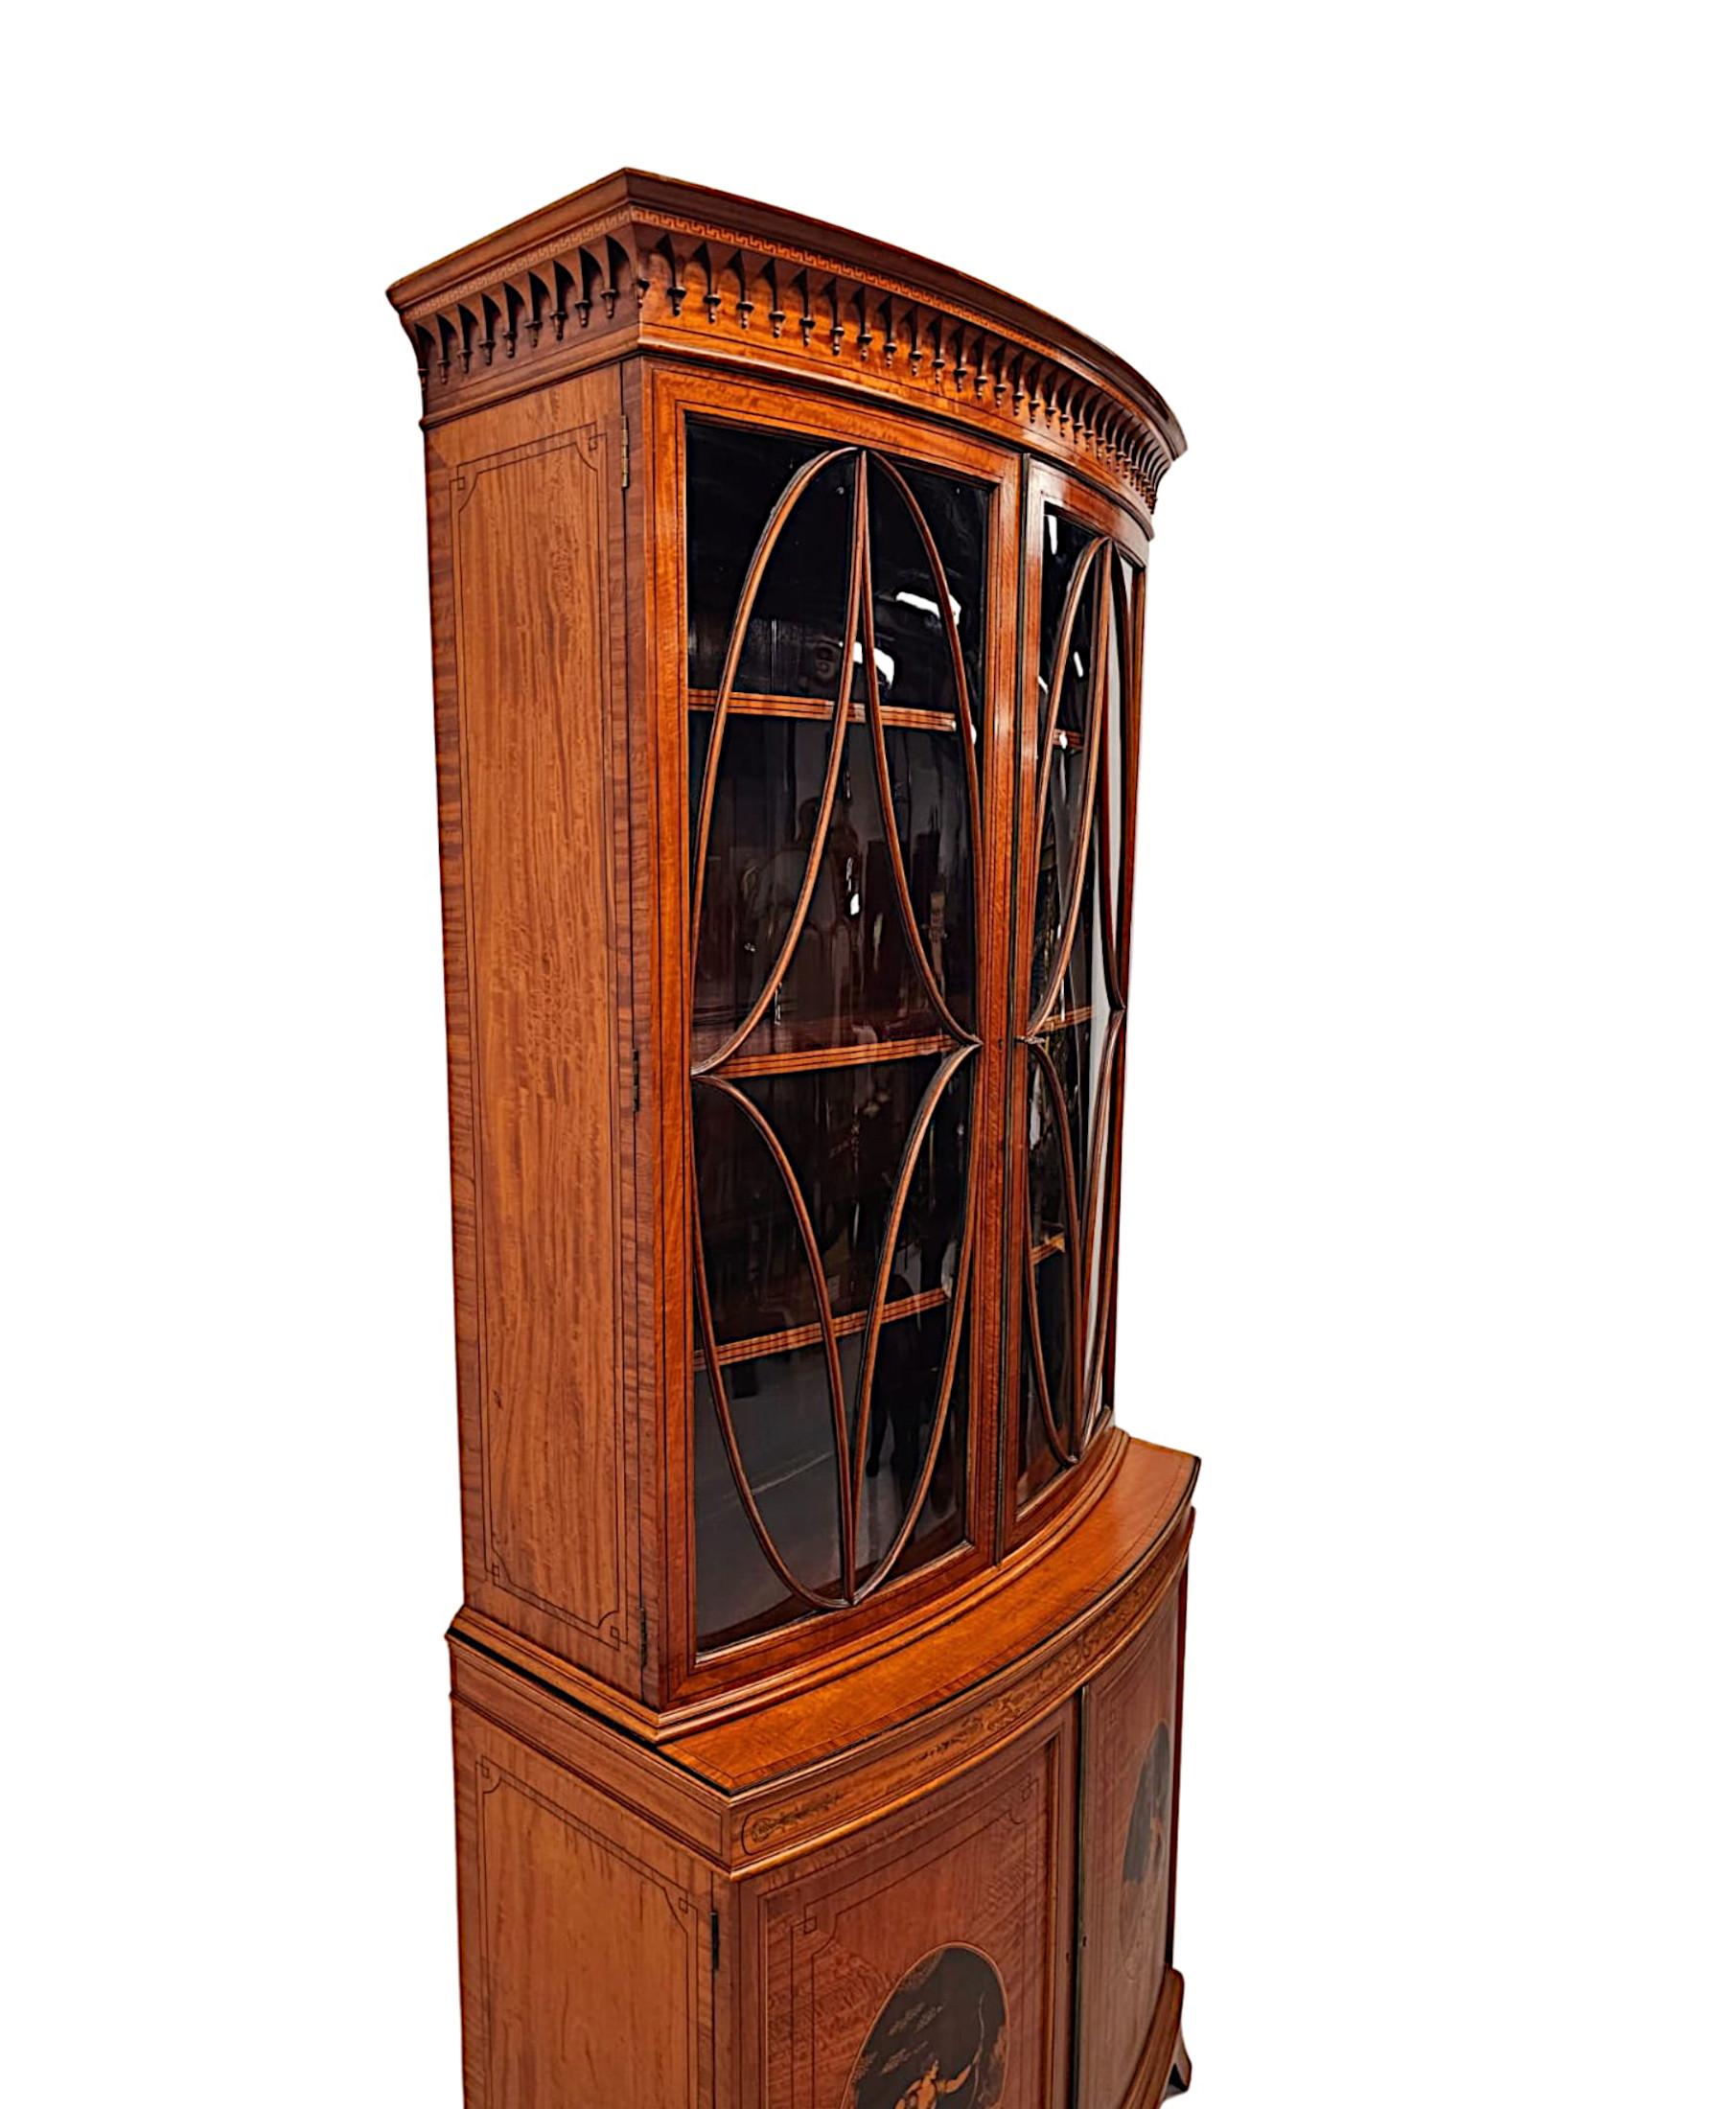 A  Fine Edwardian Marquetry Inlaid Bowfronted Bookcase afterf Edward and Roberts For Sale 1